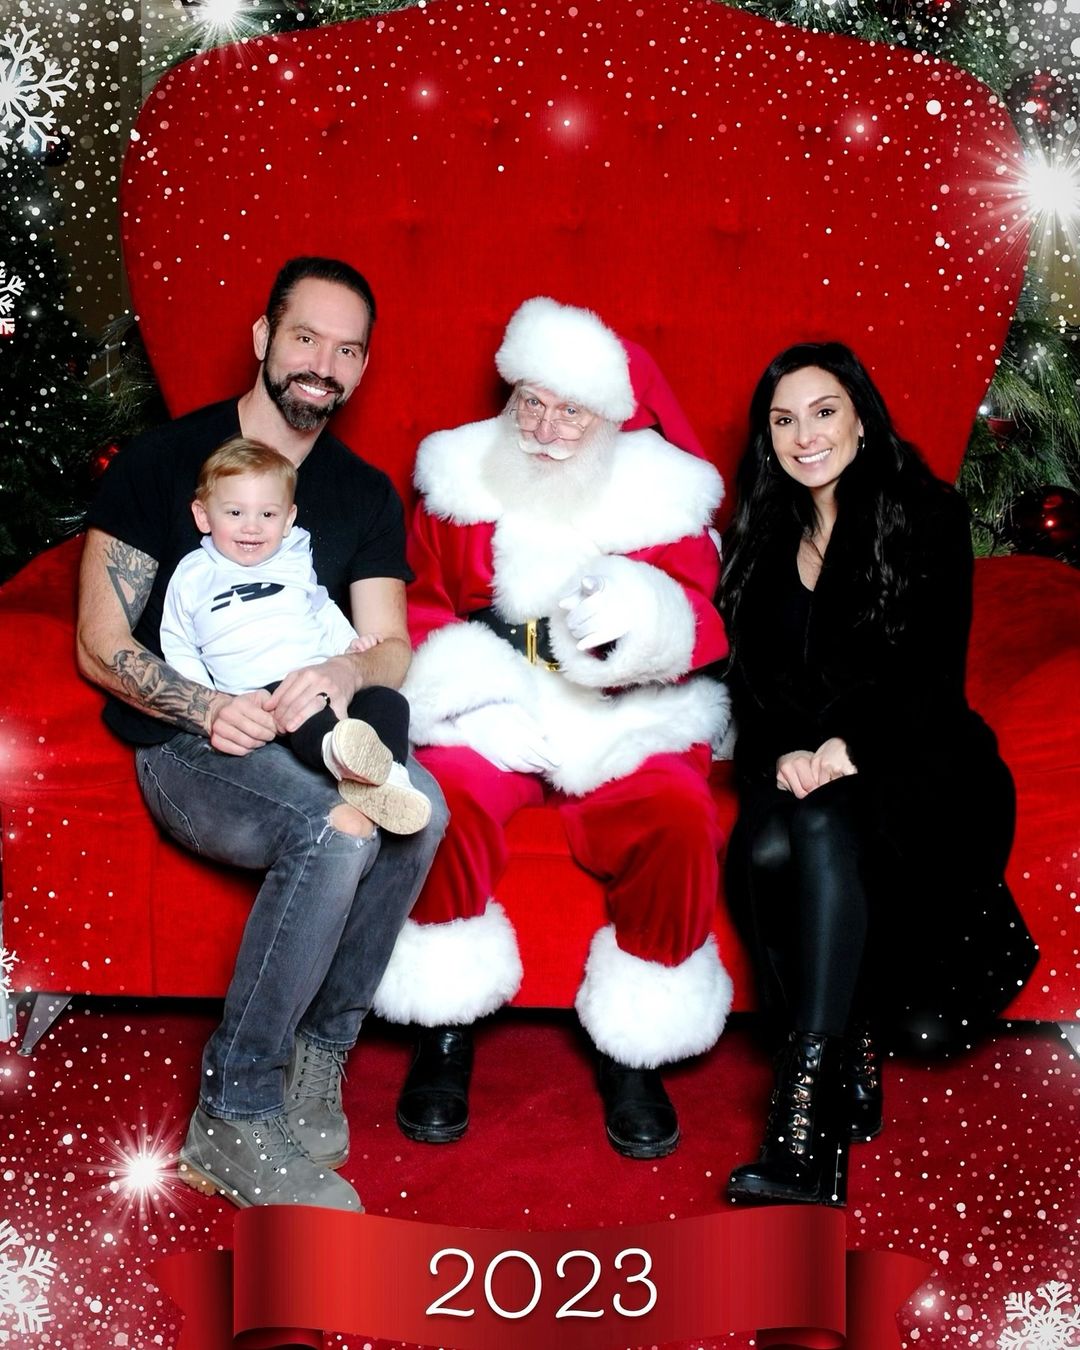 Nick Groff with his wife Tessa and son Luciano. 